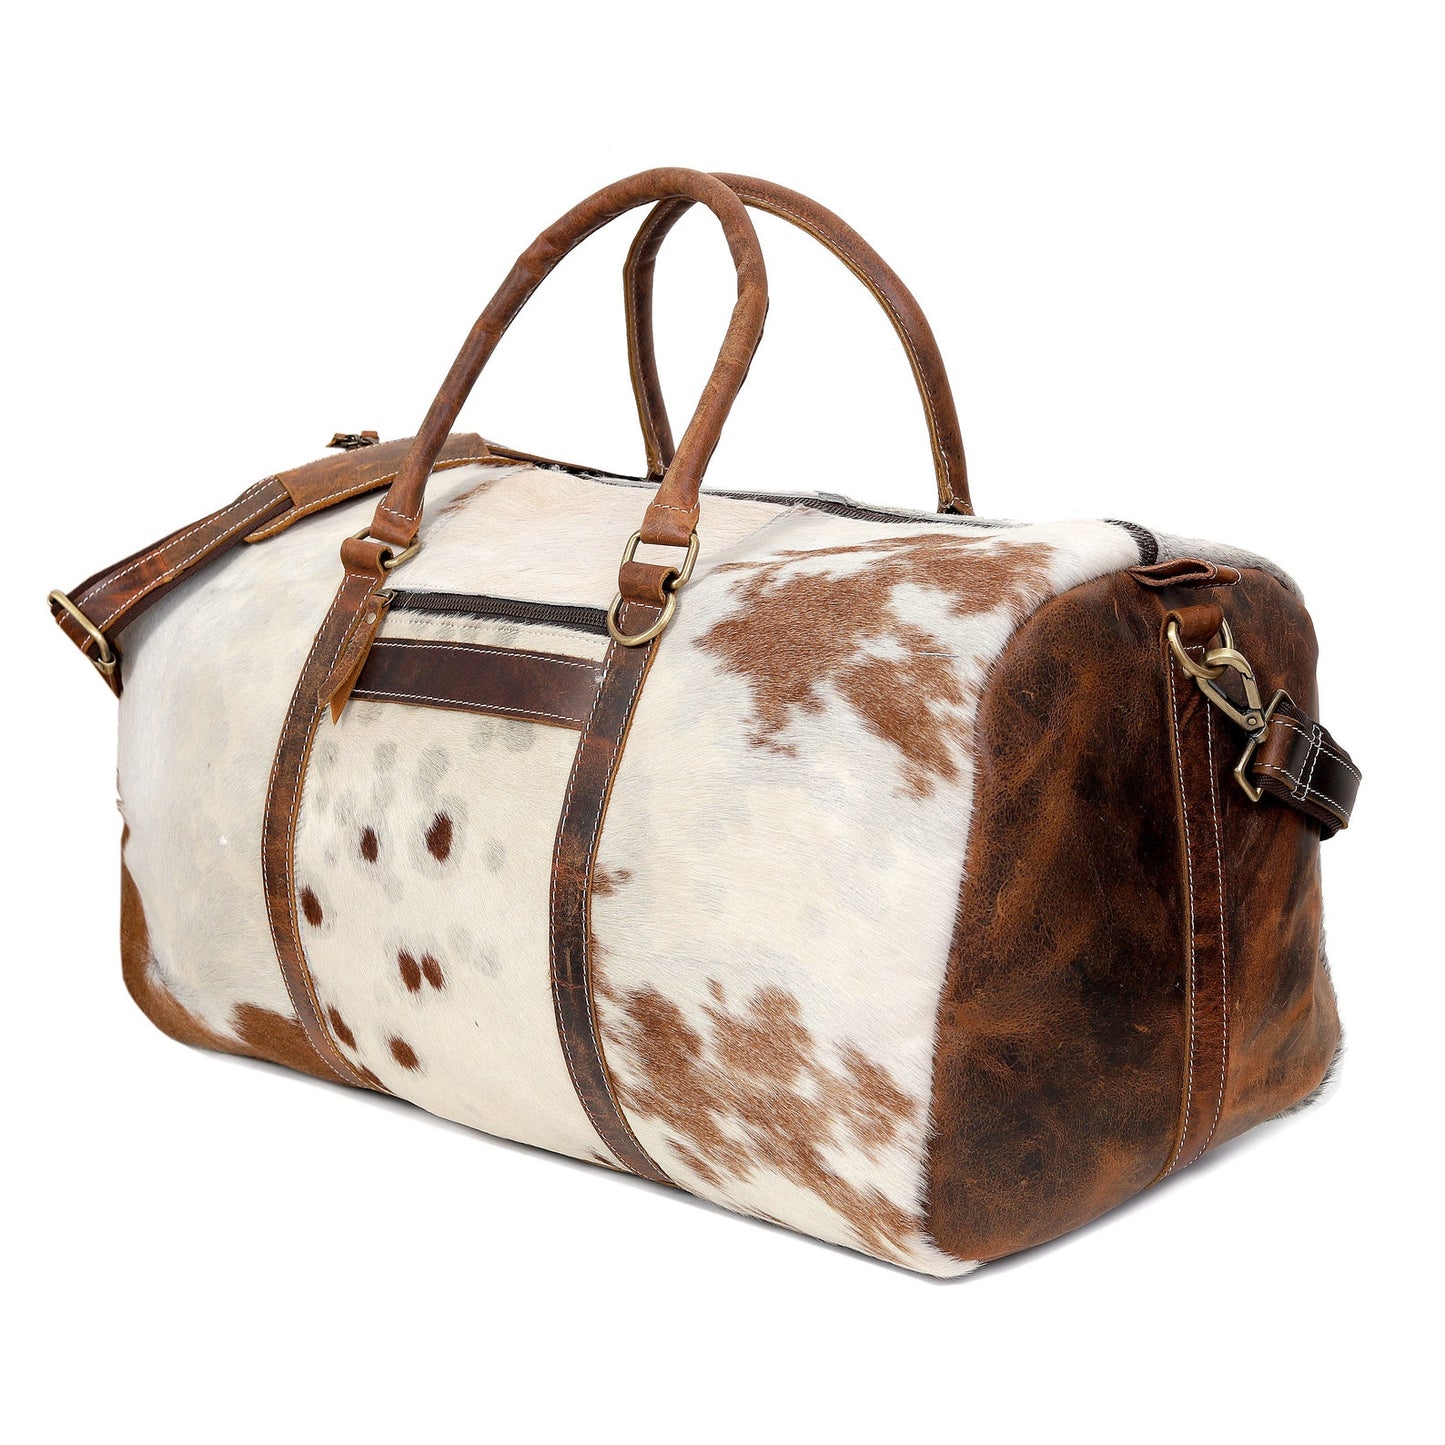 Explore the world with this cowhide travel bag, a fusion of durability and elegance crafted for the discerning adventurer.